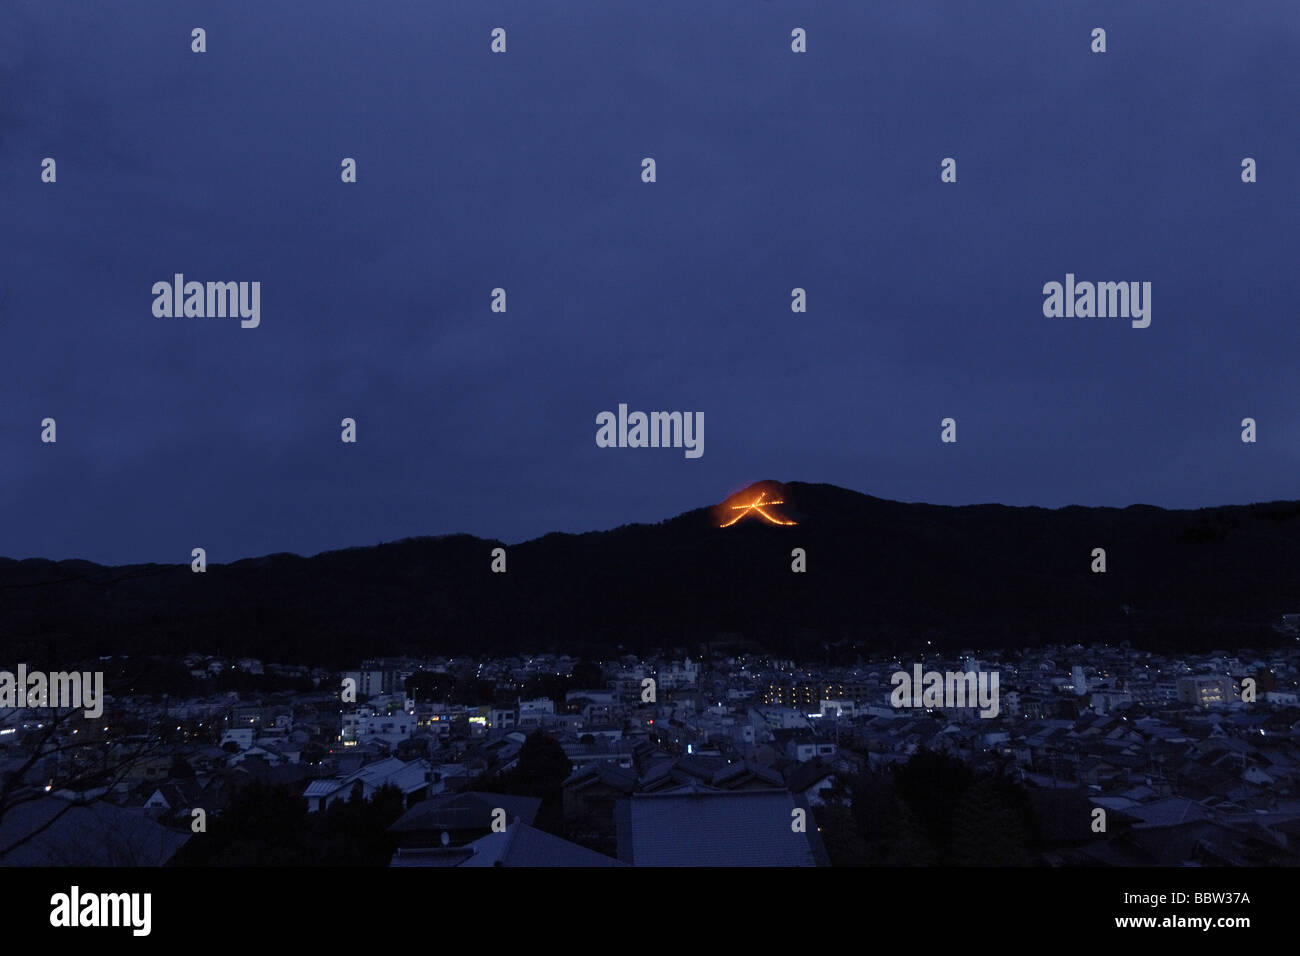 Japanese controlled fire sign illuminating a hilltop Stock Photo